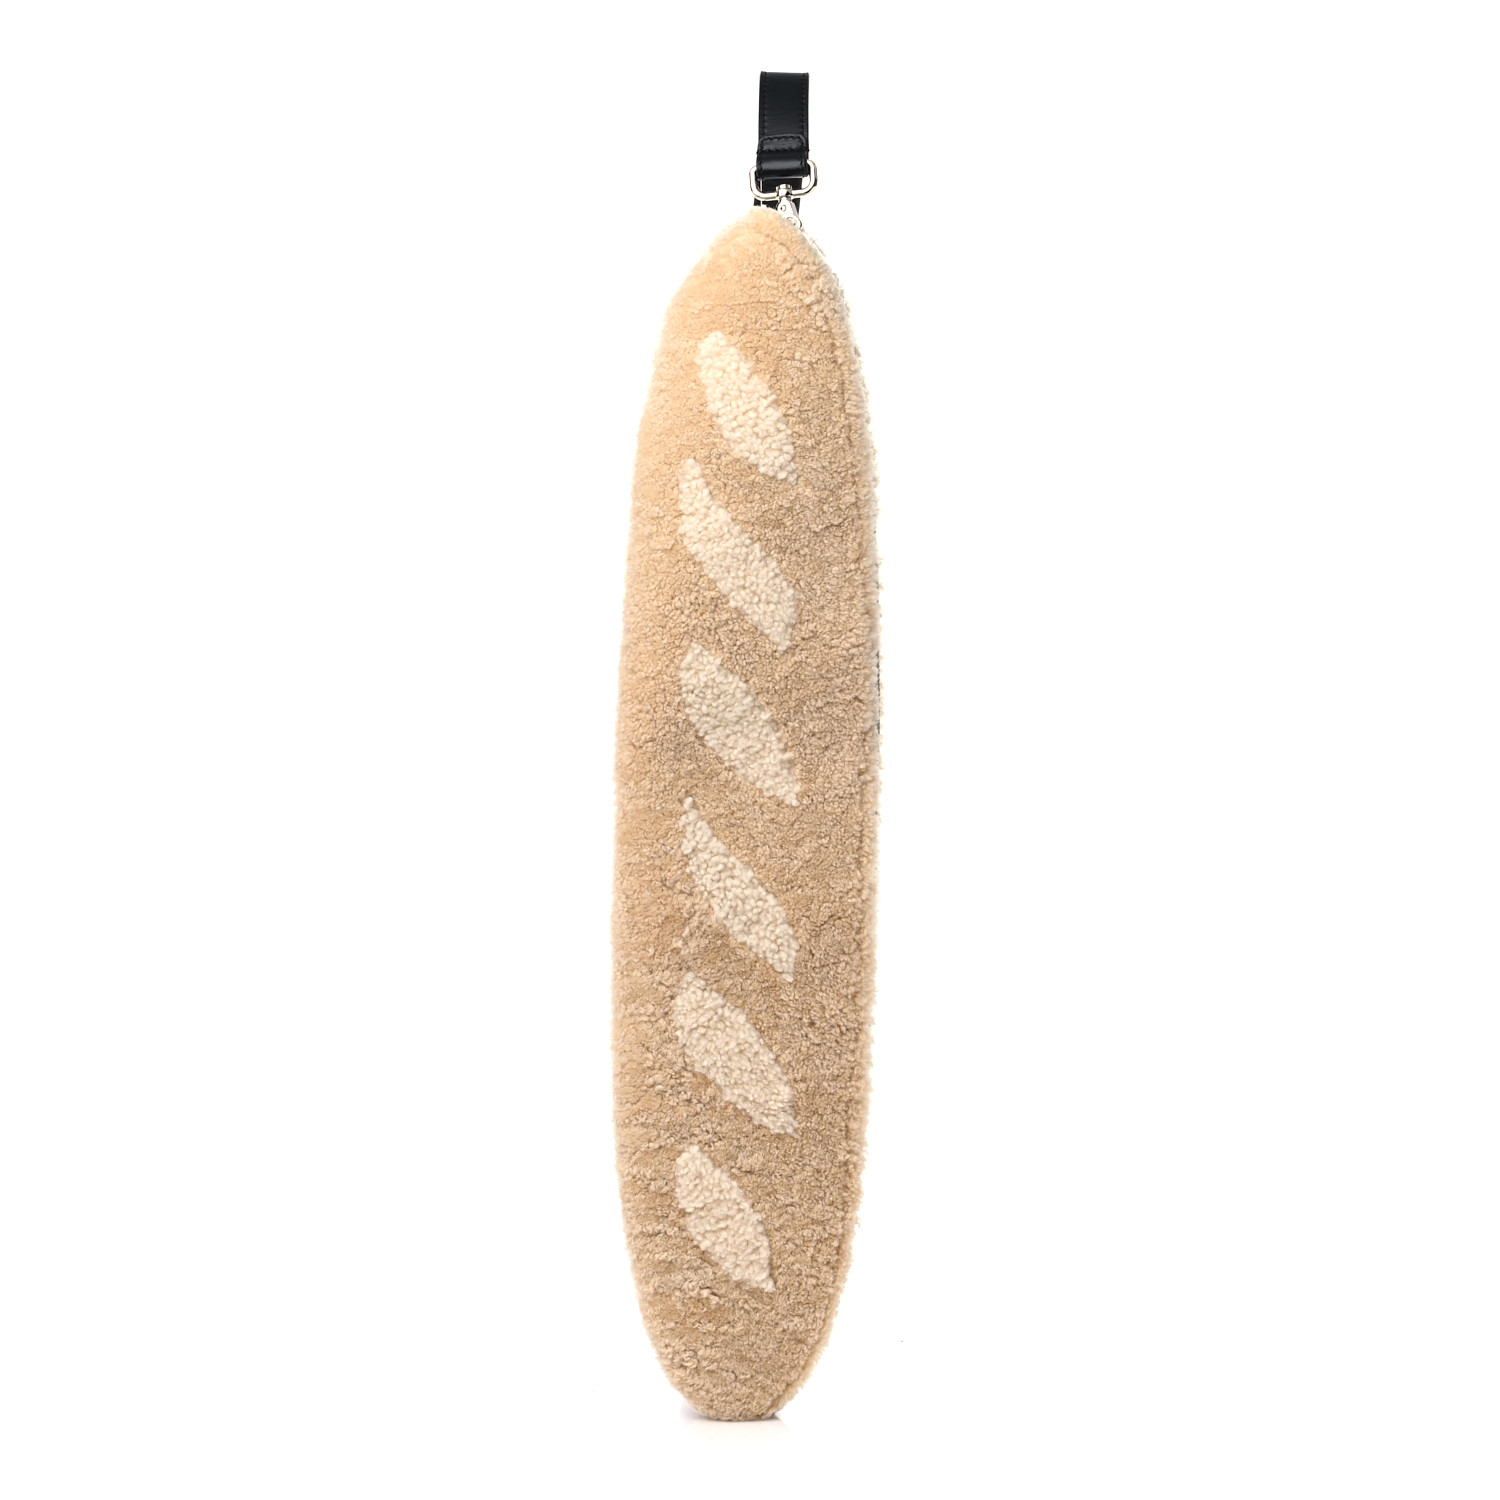 image of FENDI Sheepskin Baguette Bread Pouch in the color Beige Pana by FASHIONPHILE